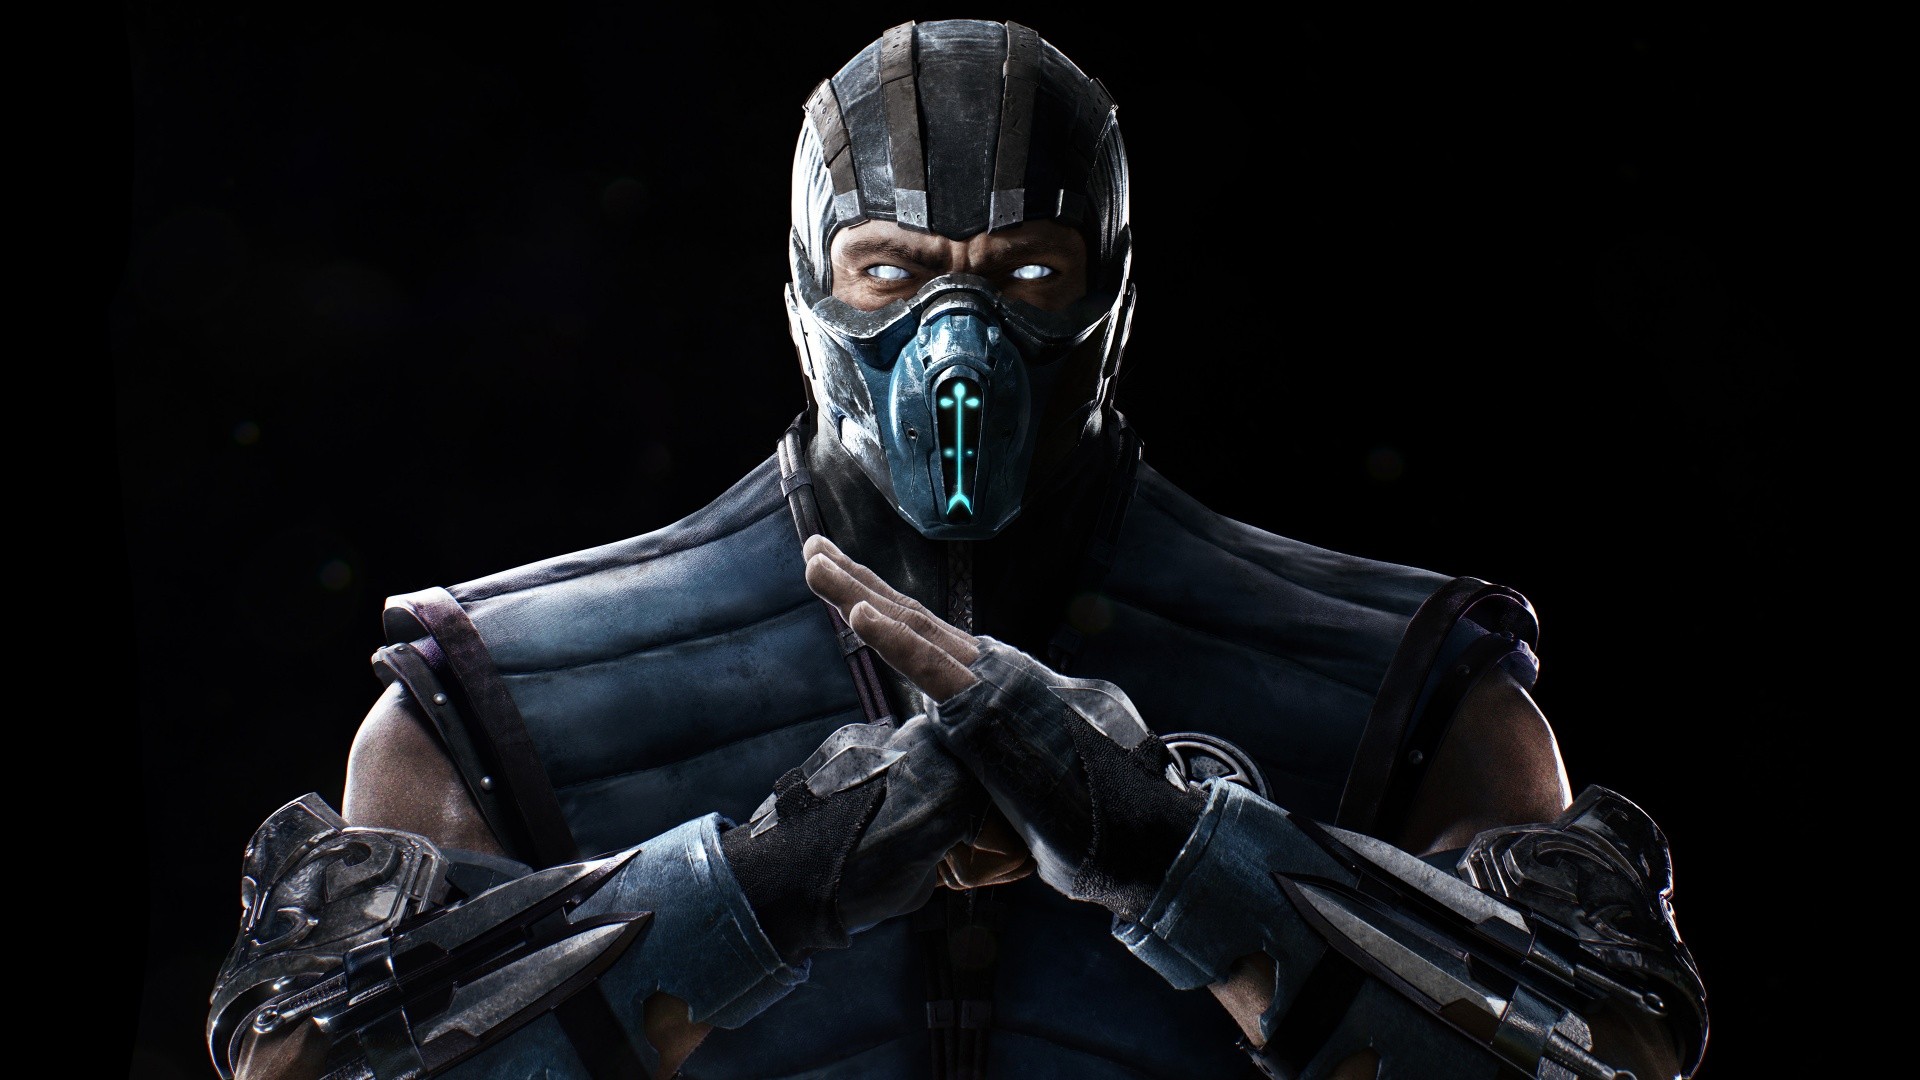 Sub Zero Video Games Warrior Video Game Warriors Simple Background Fist Glowing Eyes 1920x1080